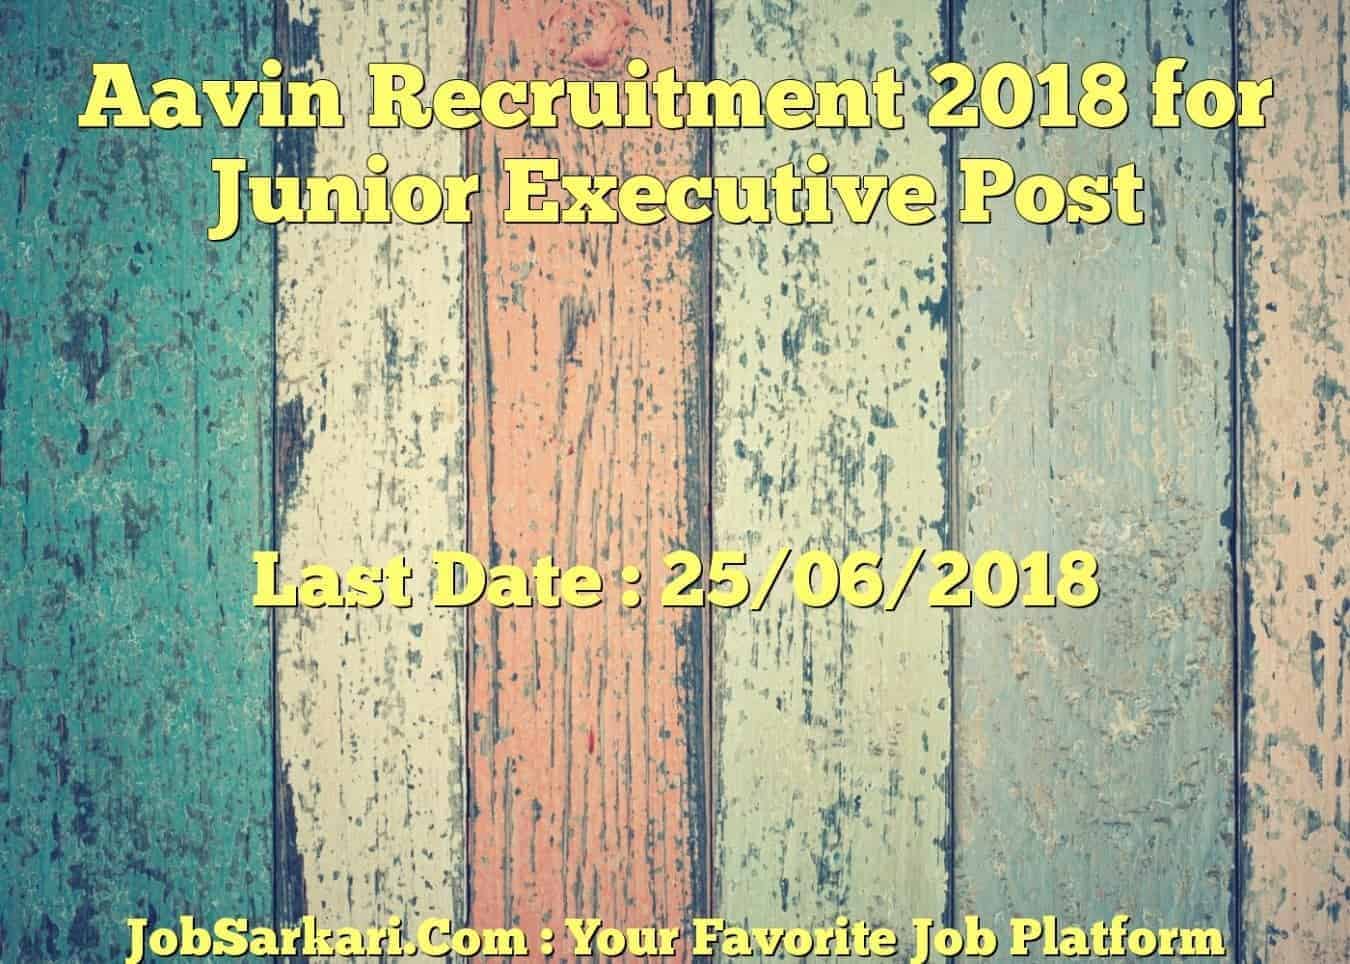 Aavin Recruitment 2018 for Junior Executive Post